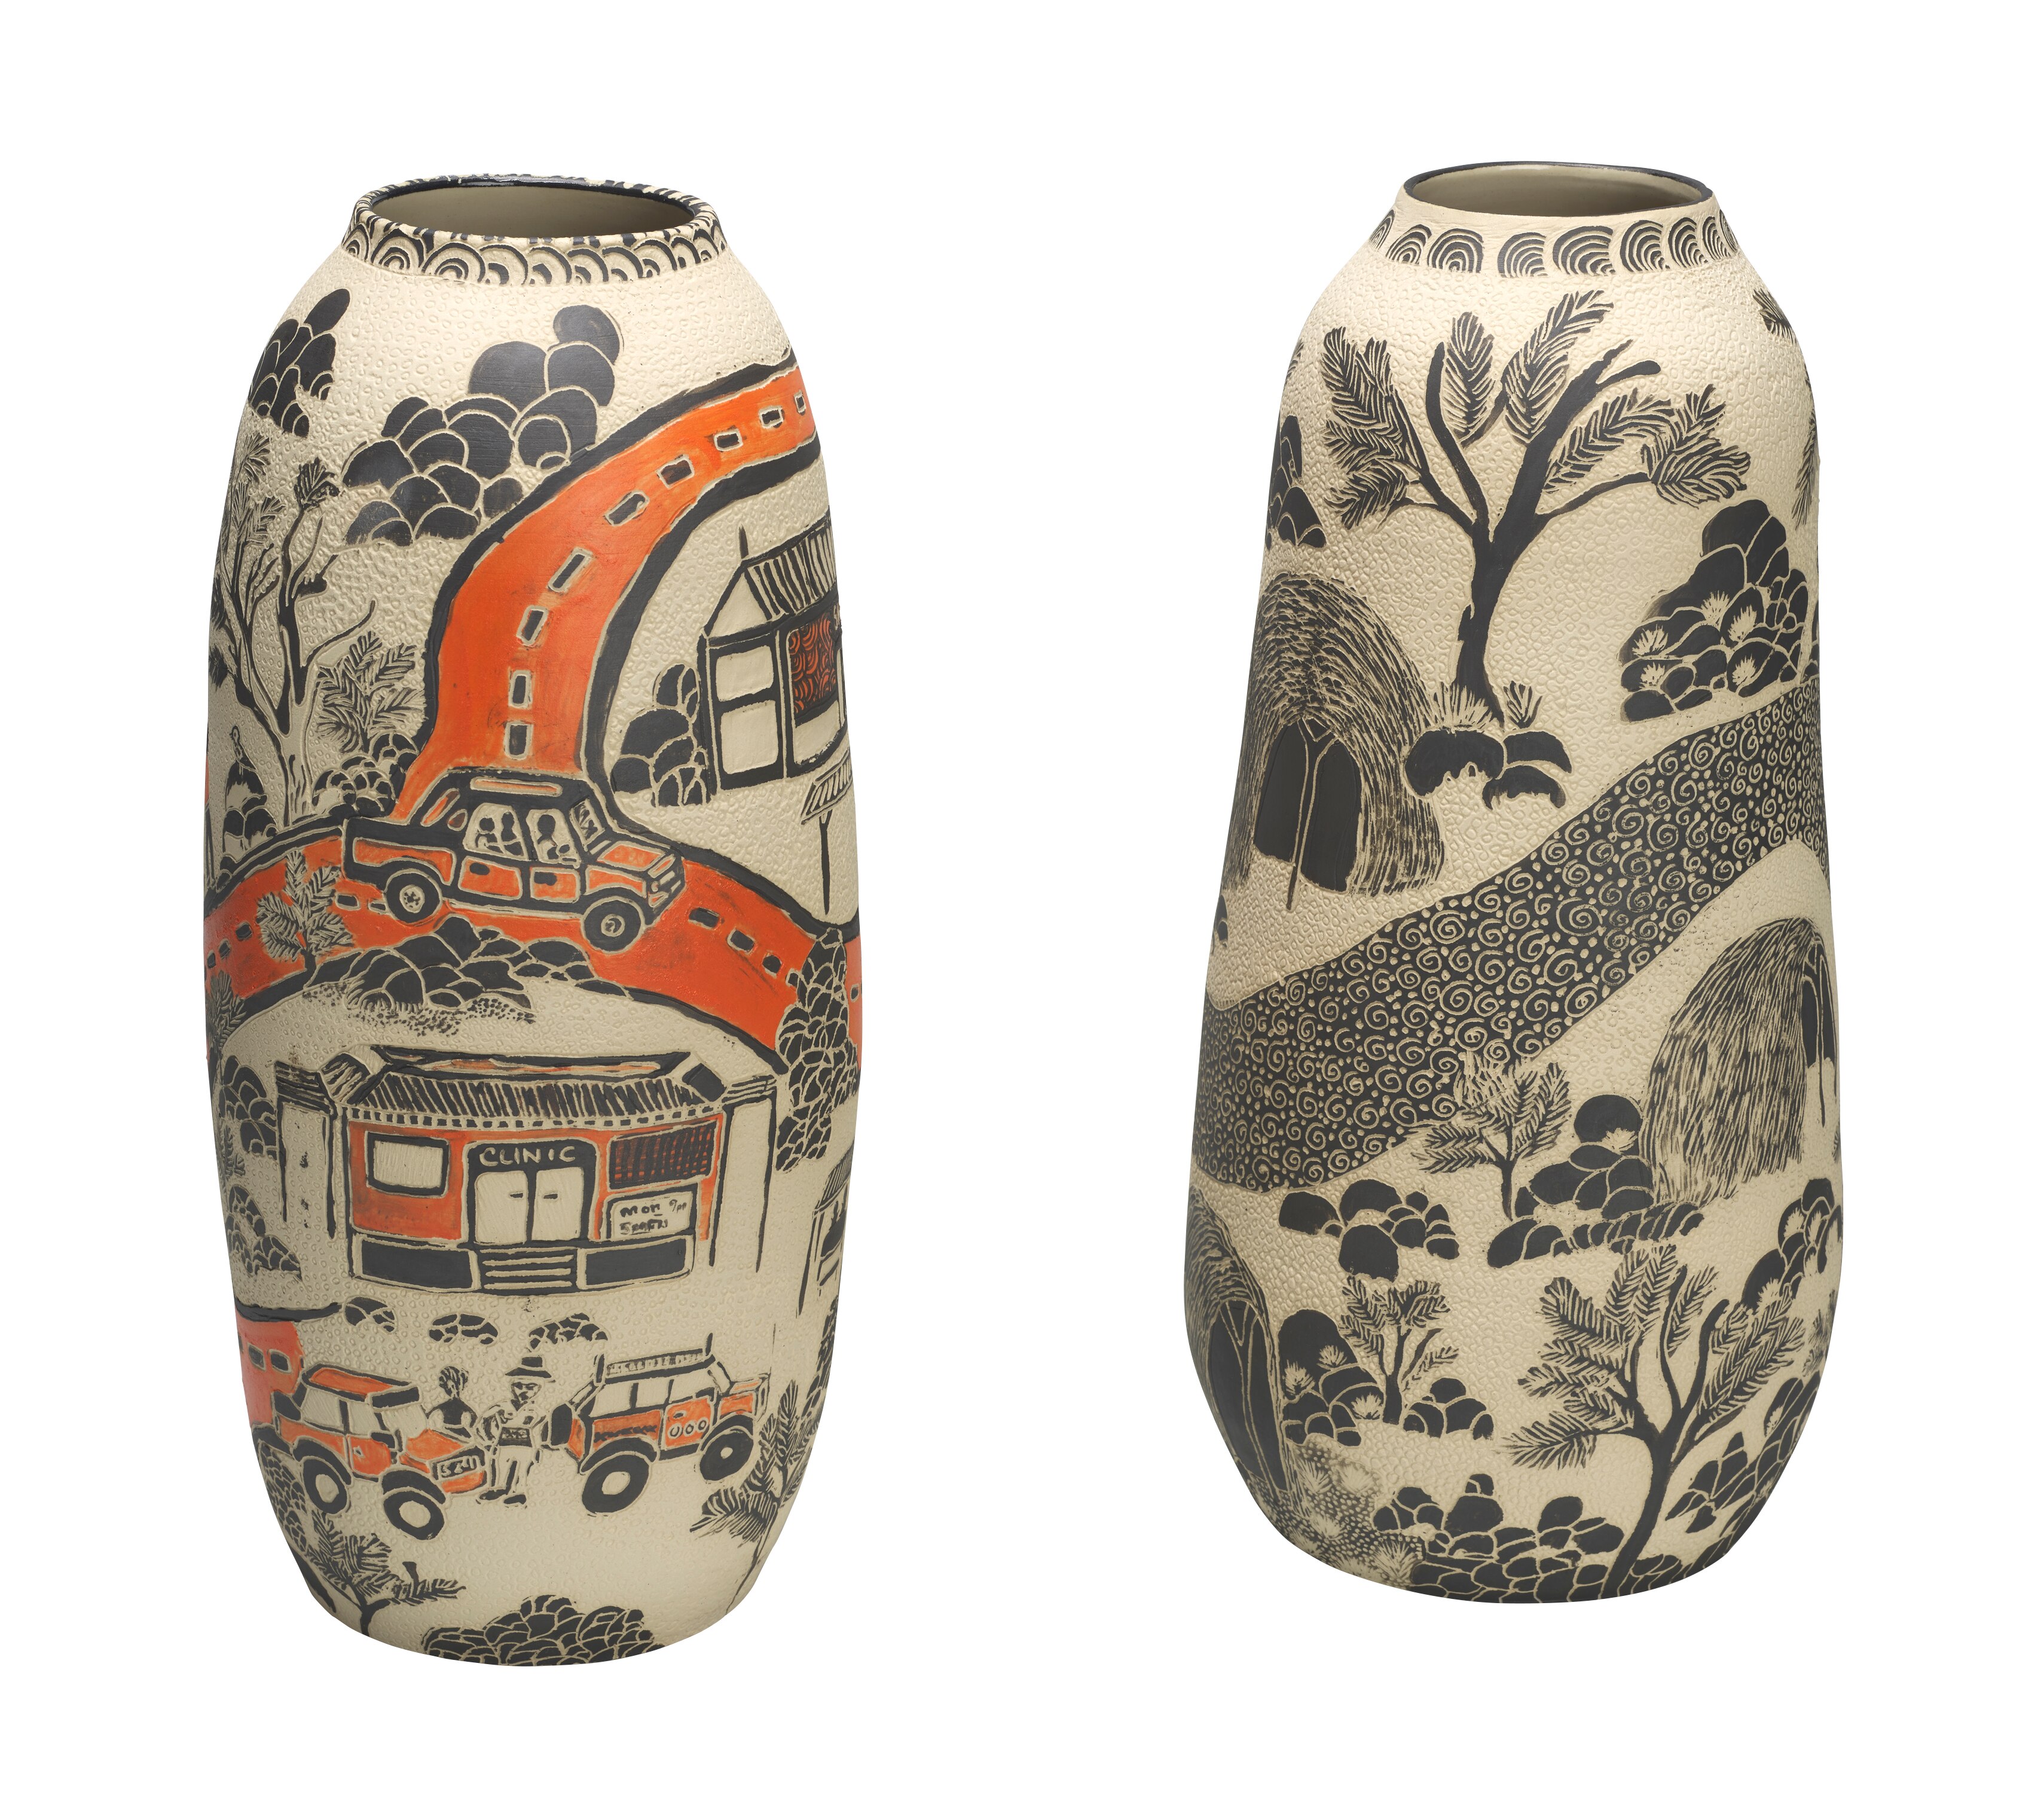 Two ceramic vessels intractely pained with cars and houses